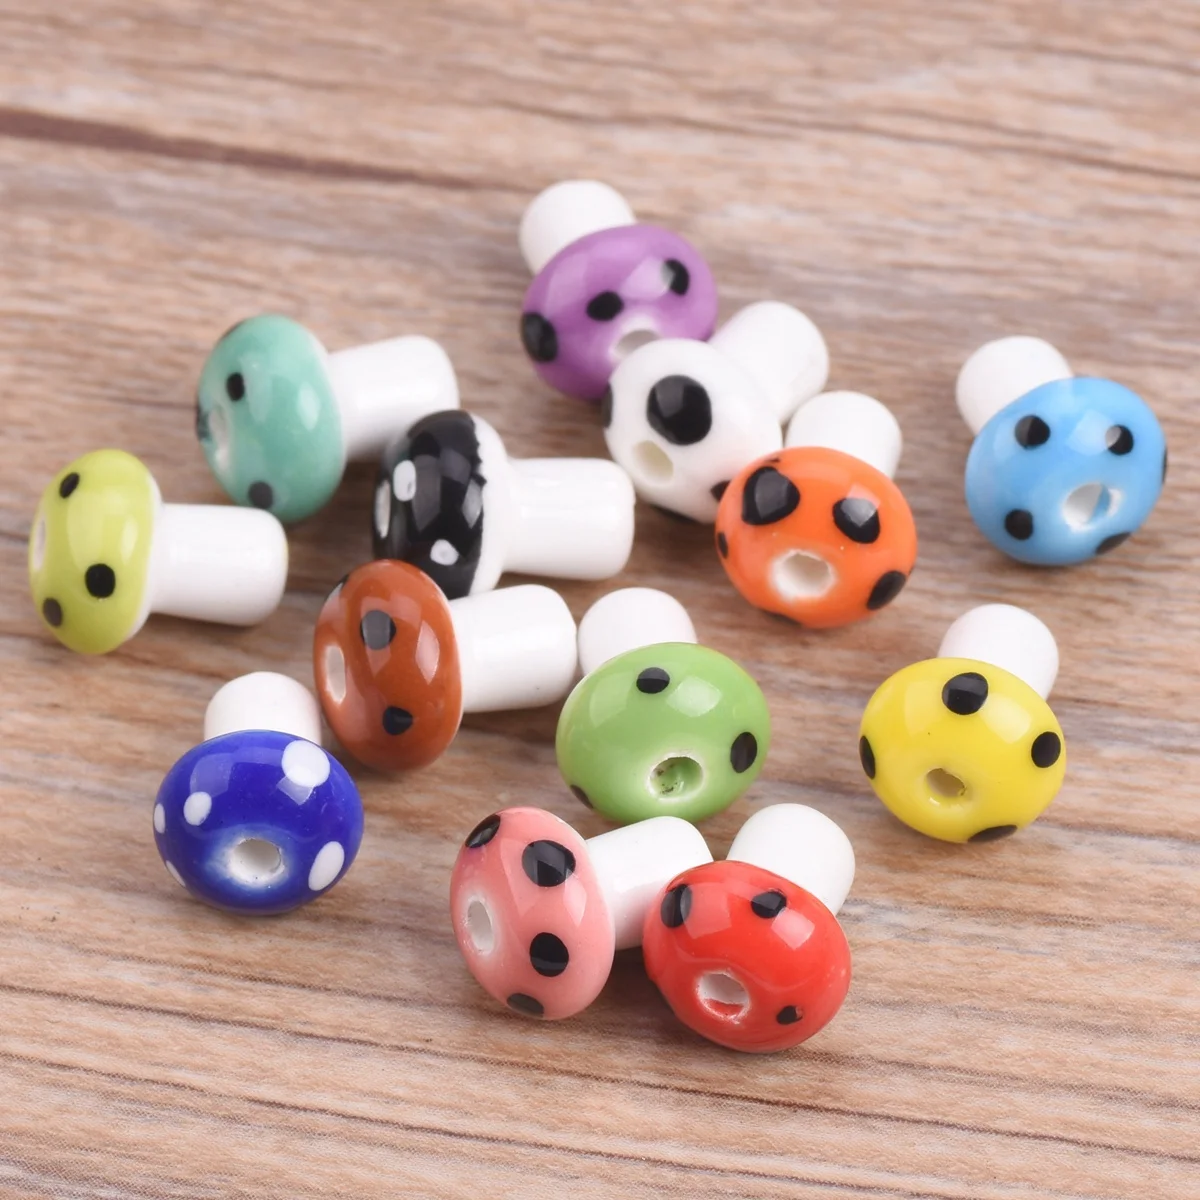 10pcs 12x10mm Mushroom Shape Handmade Ceramic Porcelain Loose Beads for DIY Crafts Jewelry Making Findings 10pcs mb 15ak 14ak mig mag gas ceramic nozzle euro style welding gun tip nozzle shield cup for welding torch porcelain nozzle